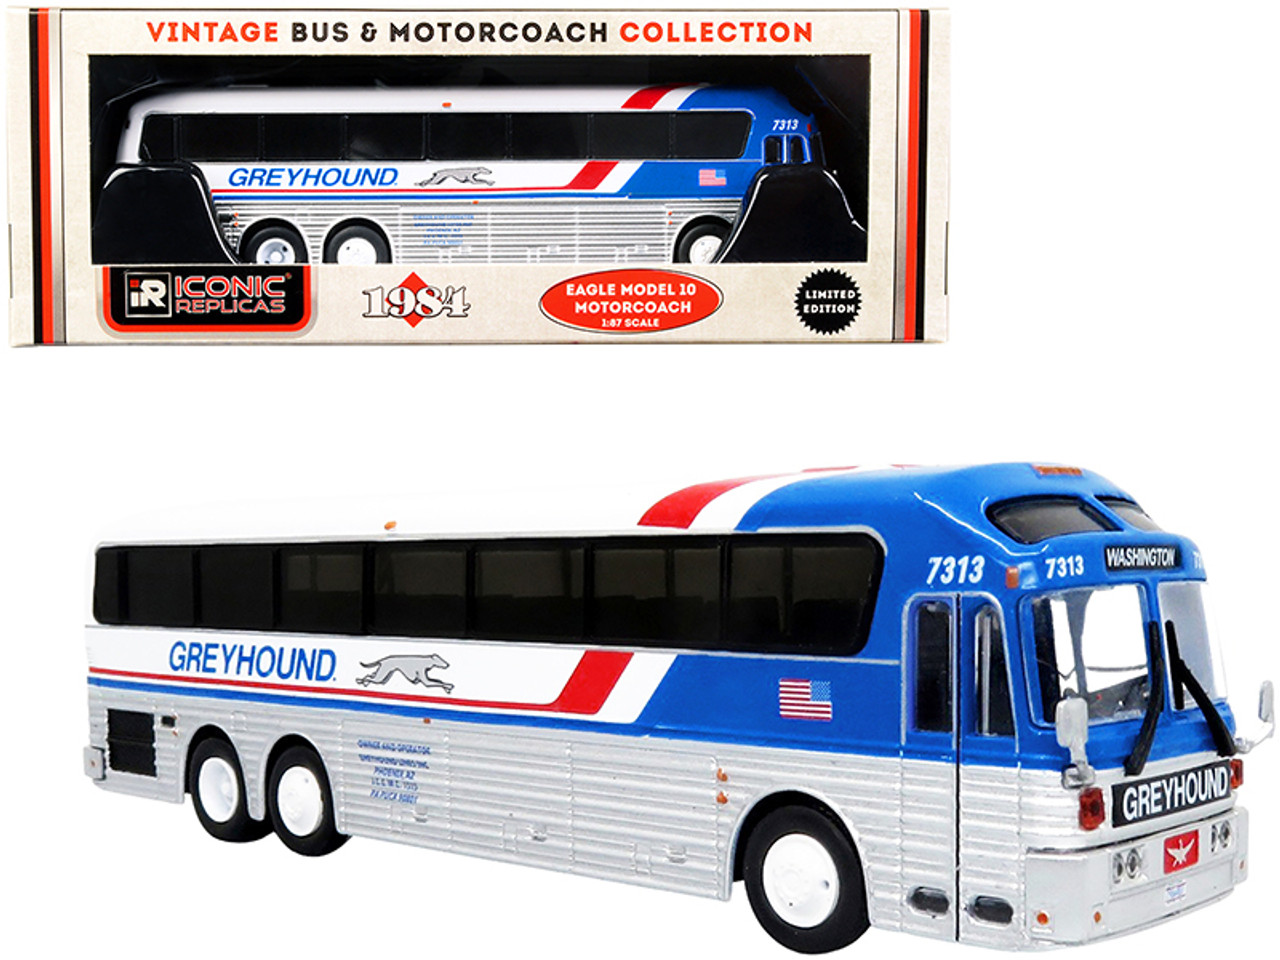 1984 Eagle Model 10 Motorcoach Bus "Washington" "Greyhound" "Vintage Bus & Motorcoach Collection" 1/87 (HO) Diecast Model by Iconic Replicas